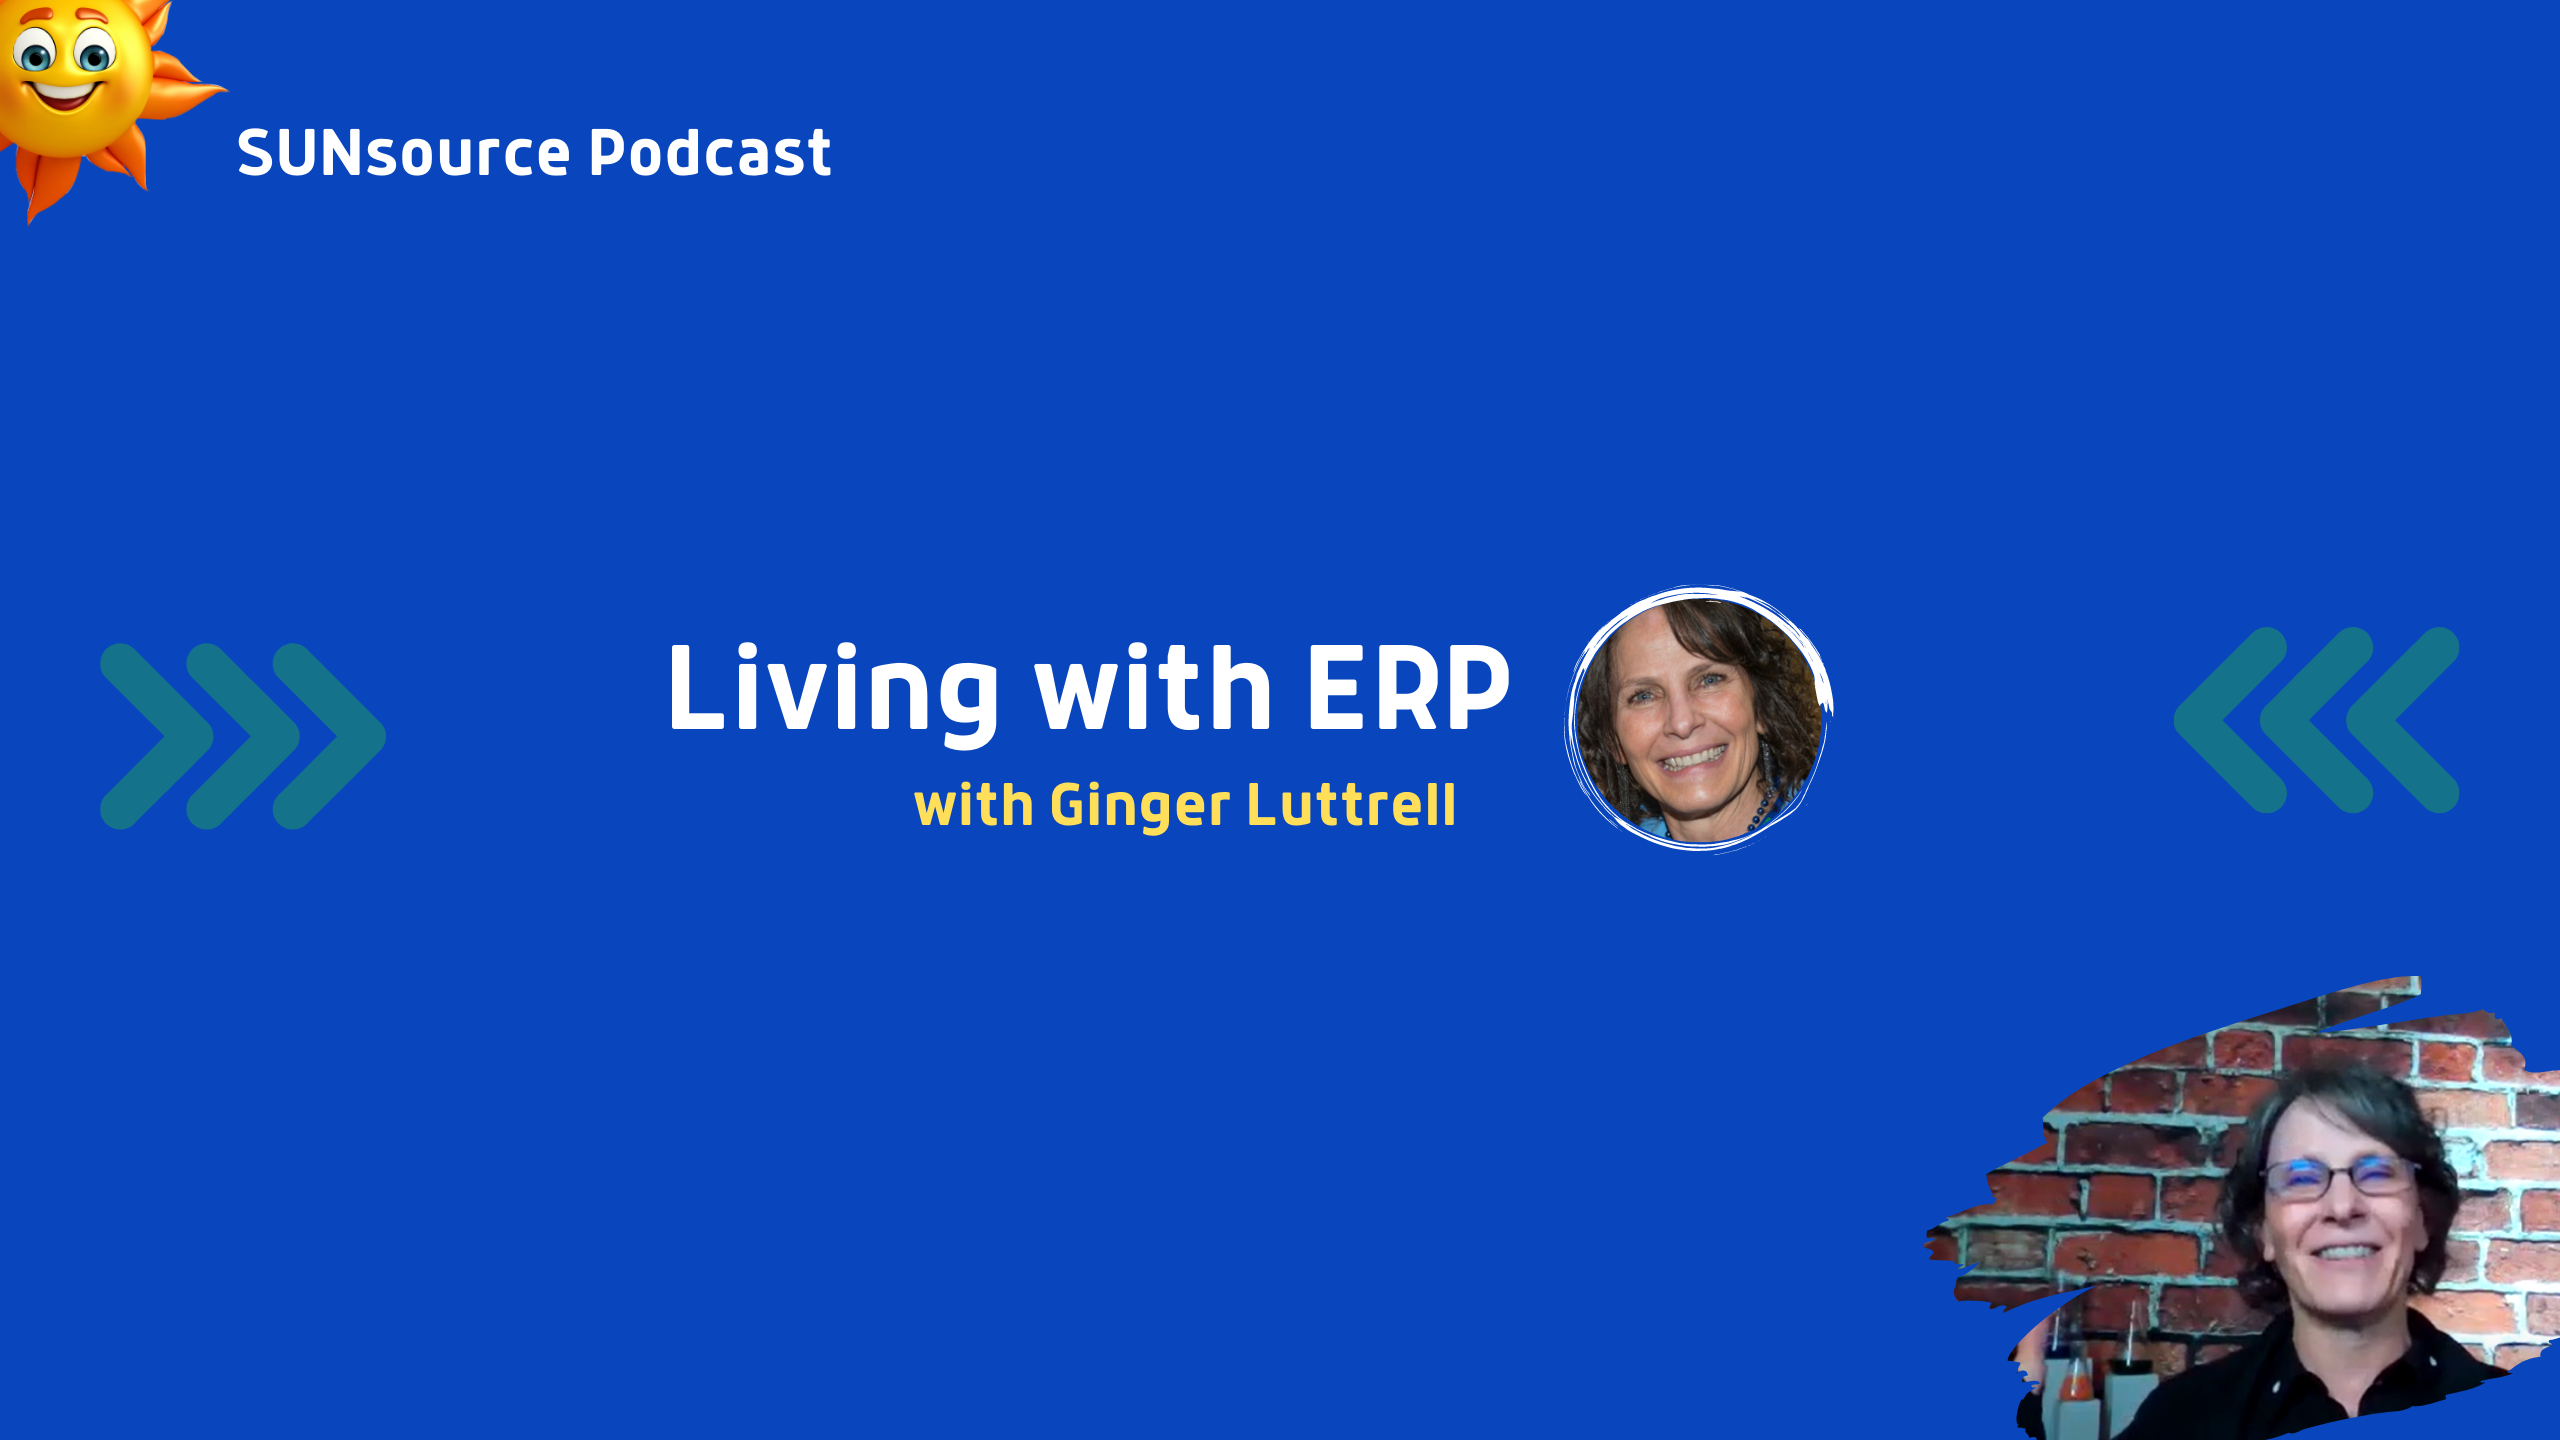 Living with ERP for web page